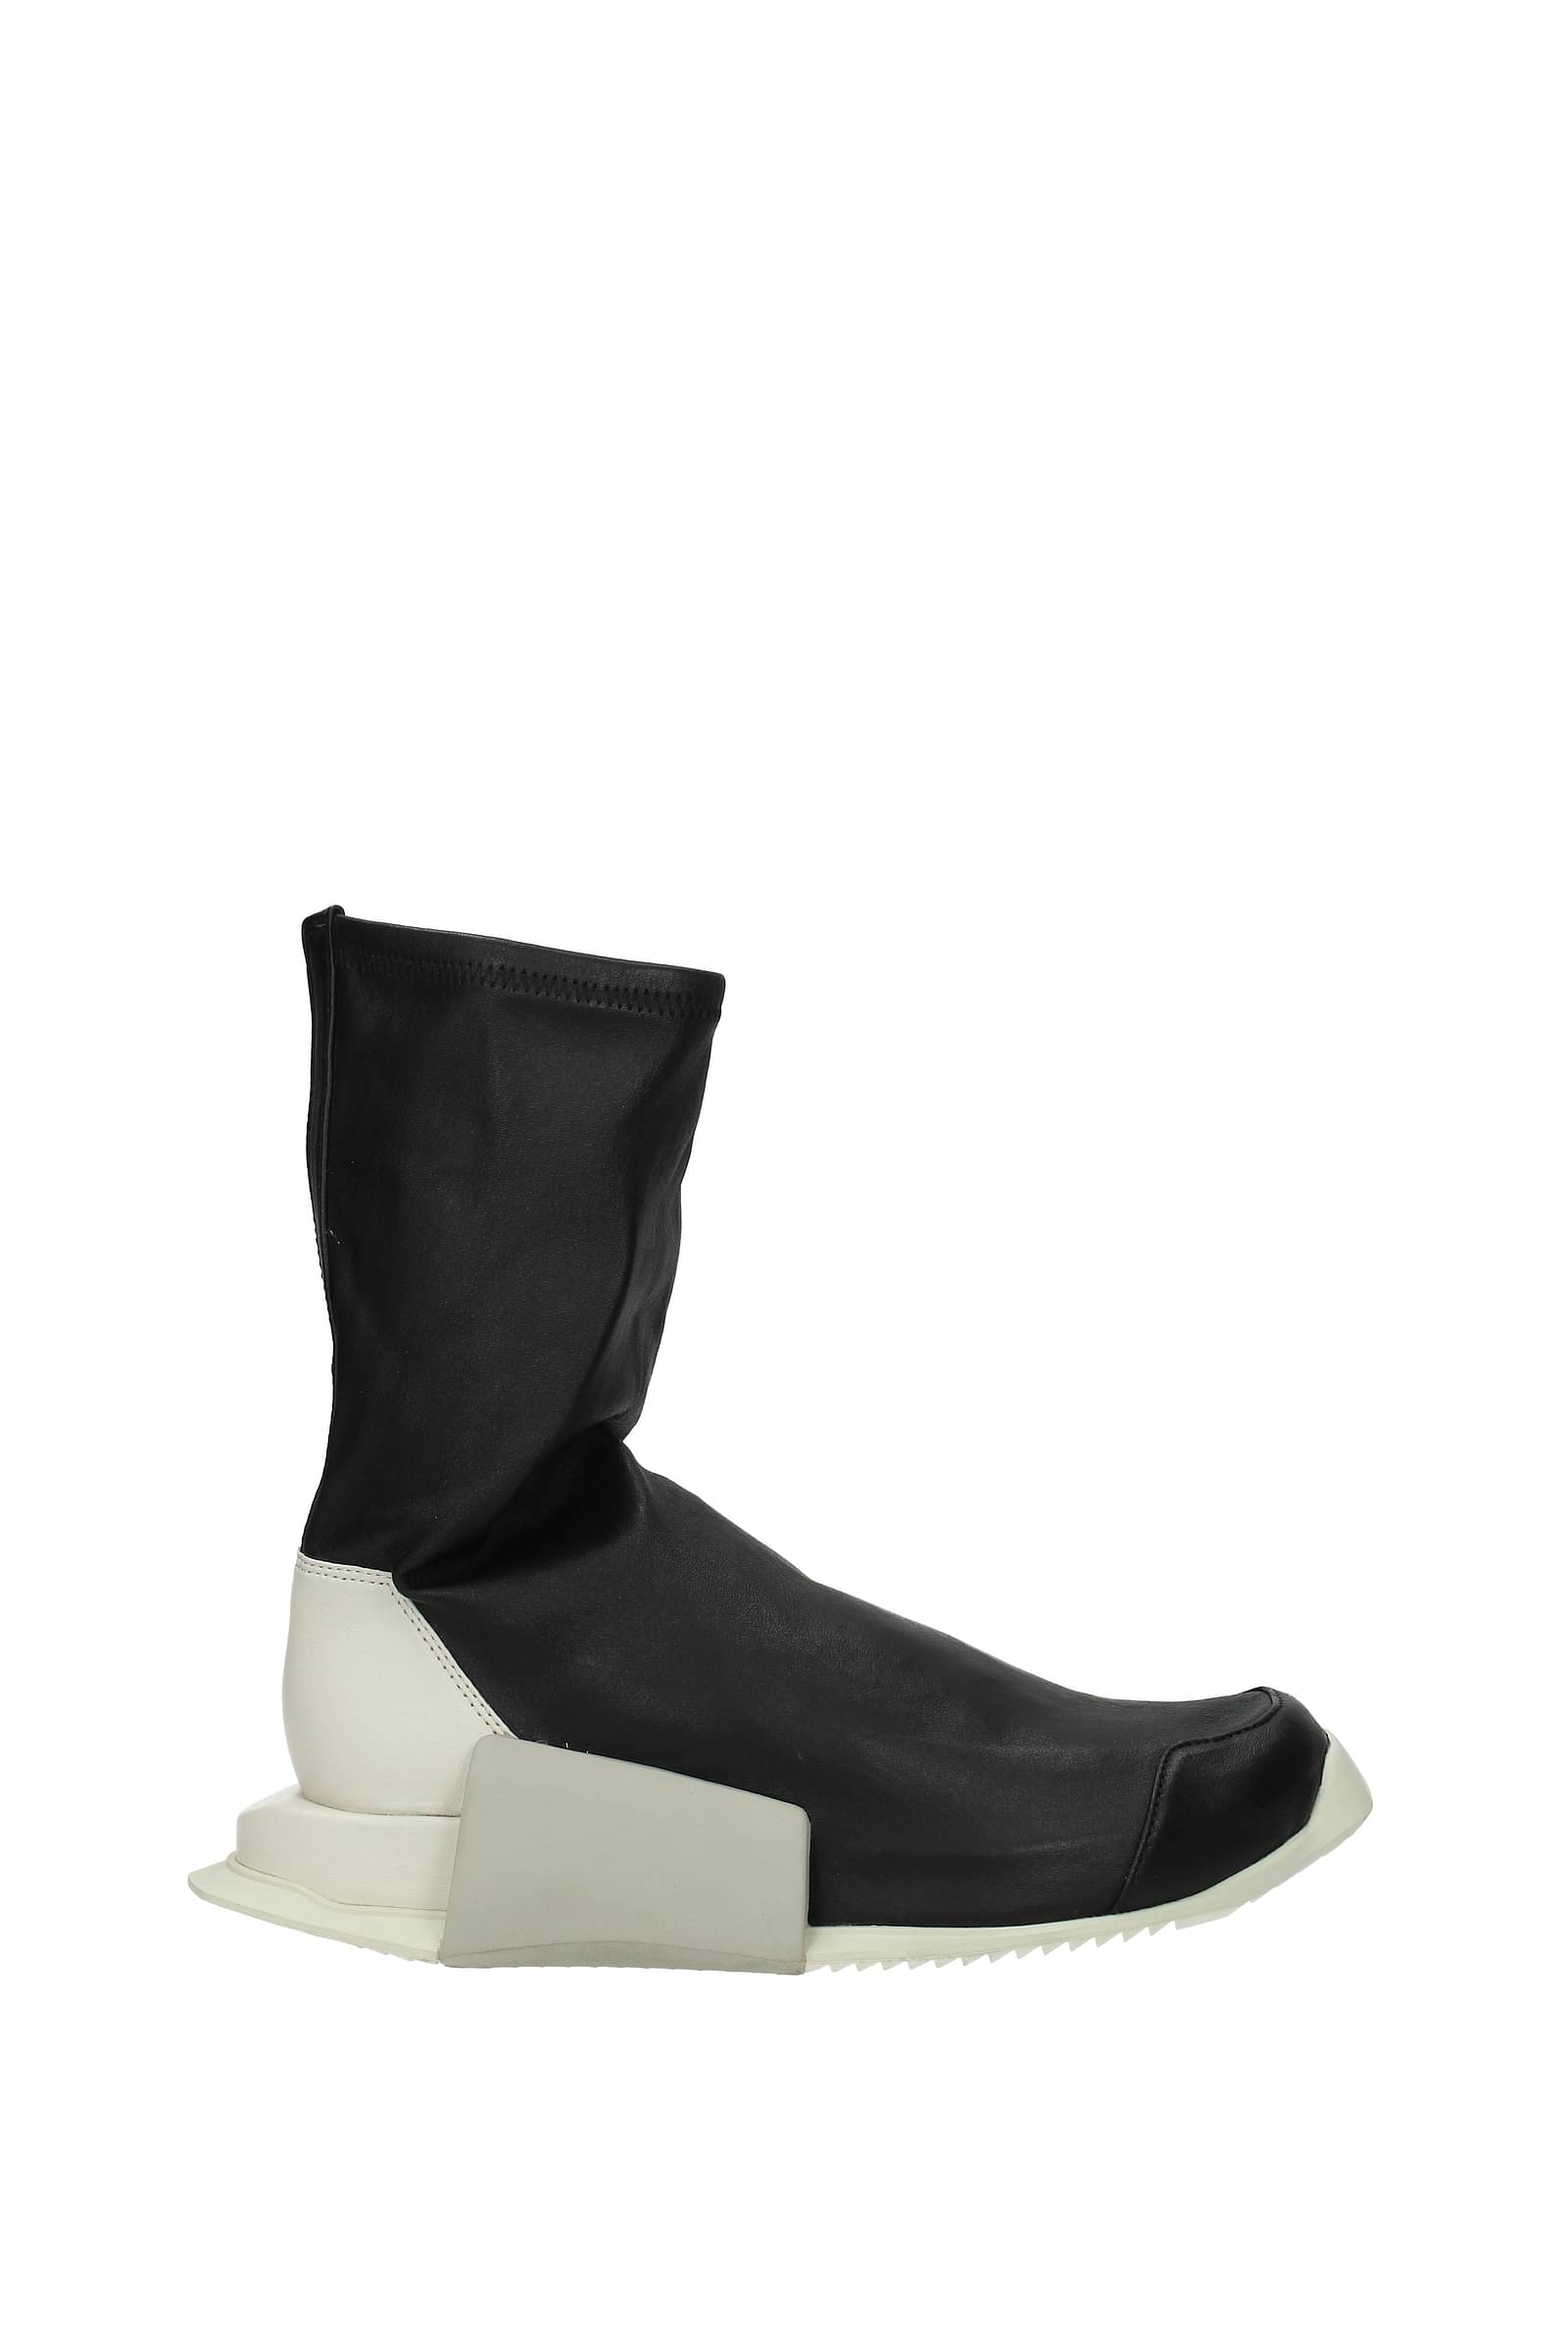 adidas ankle boots womens